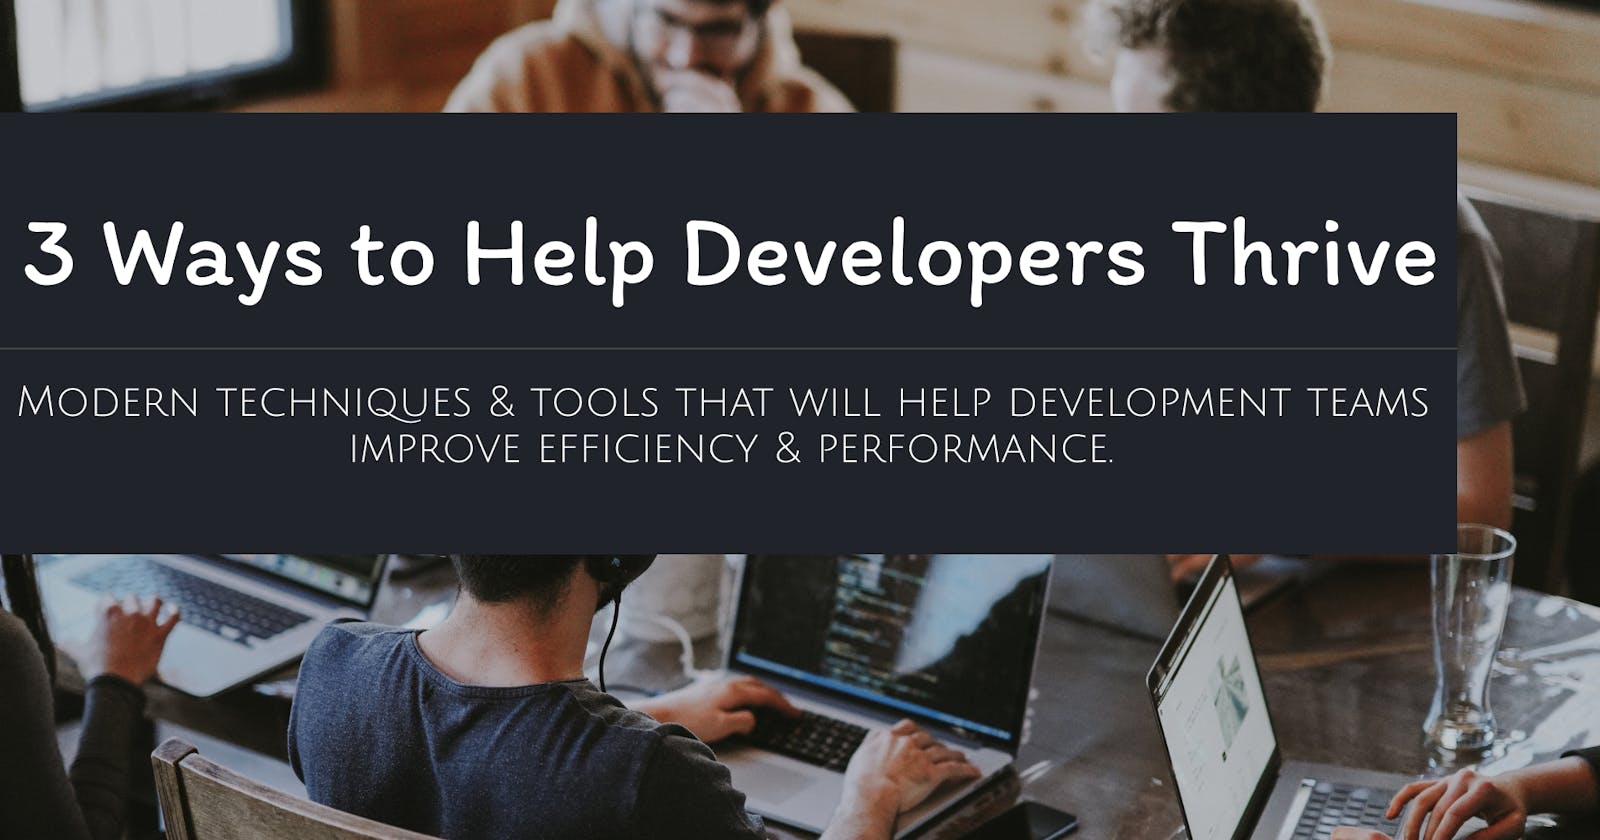 3 Ways to Help Developers Thrive